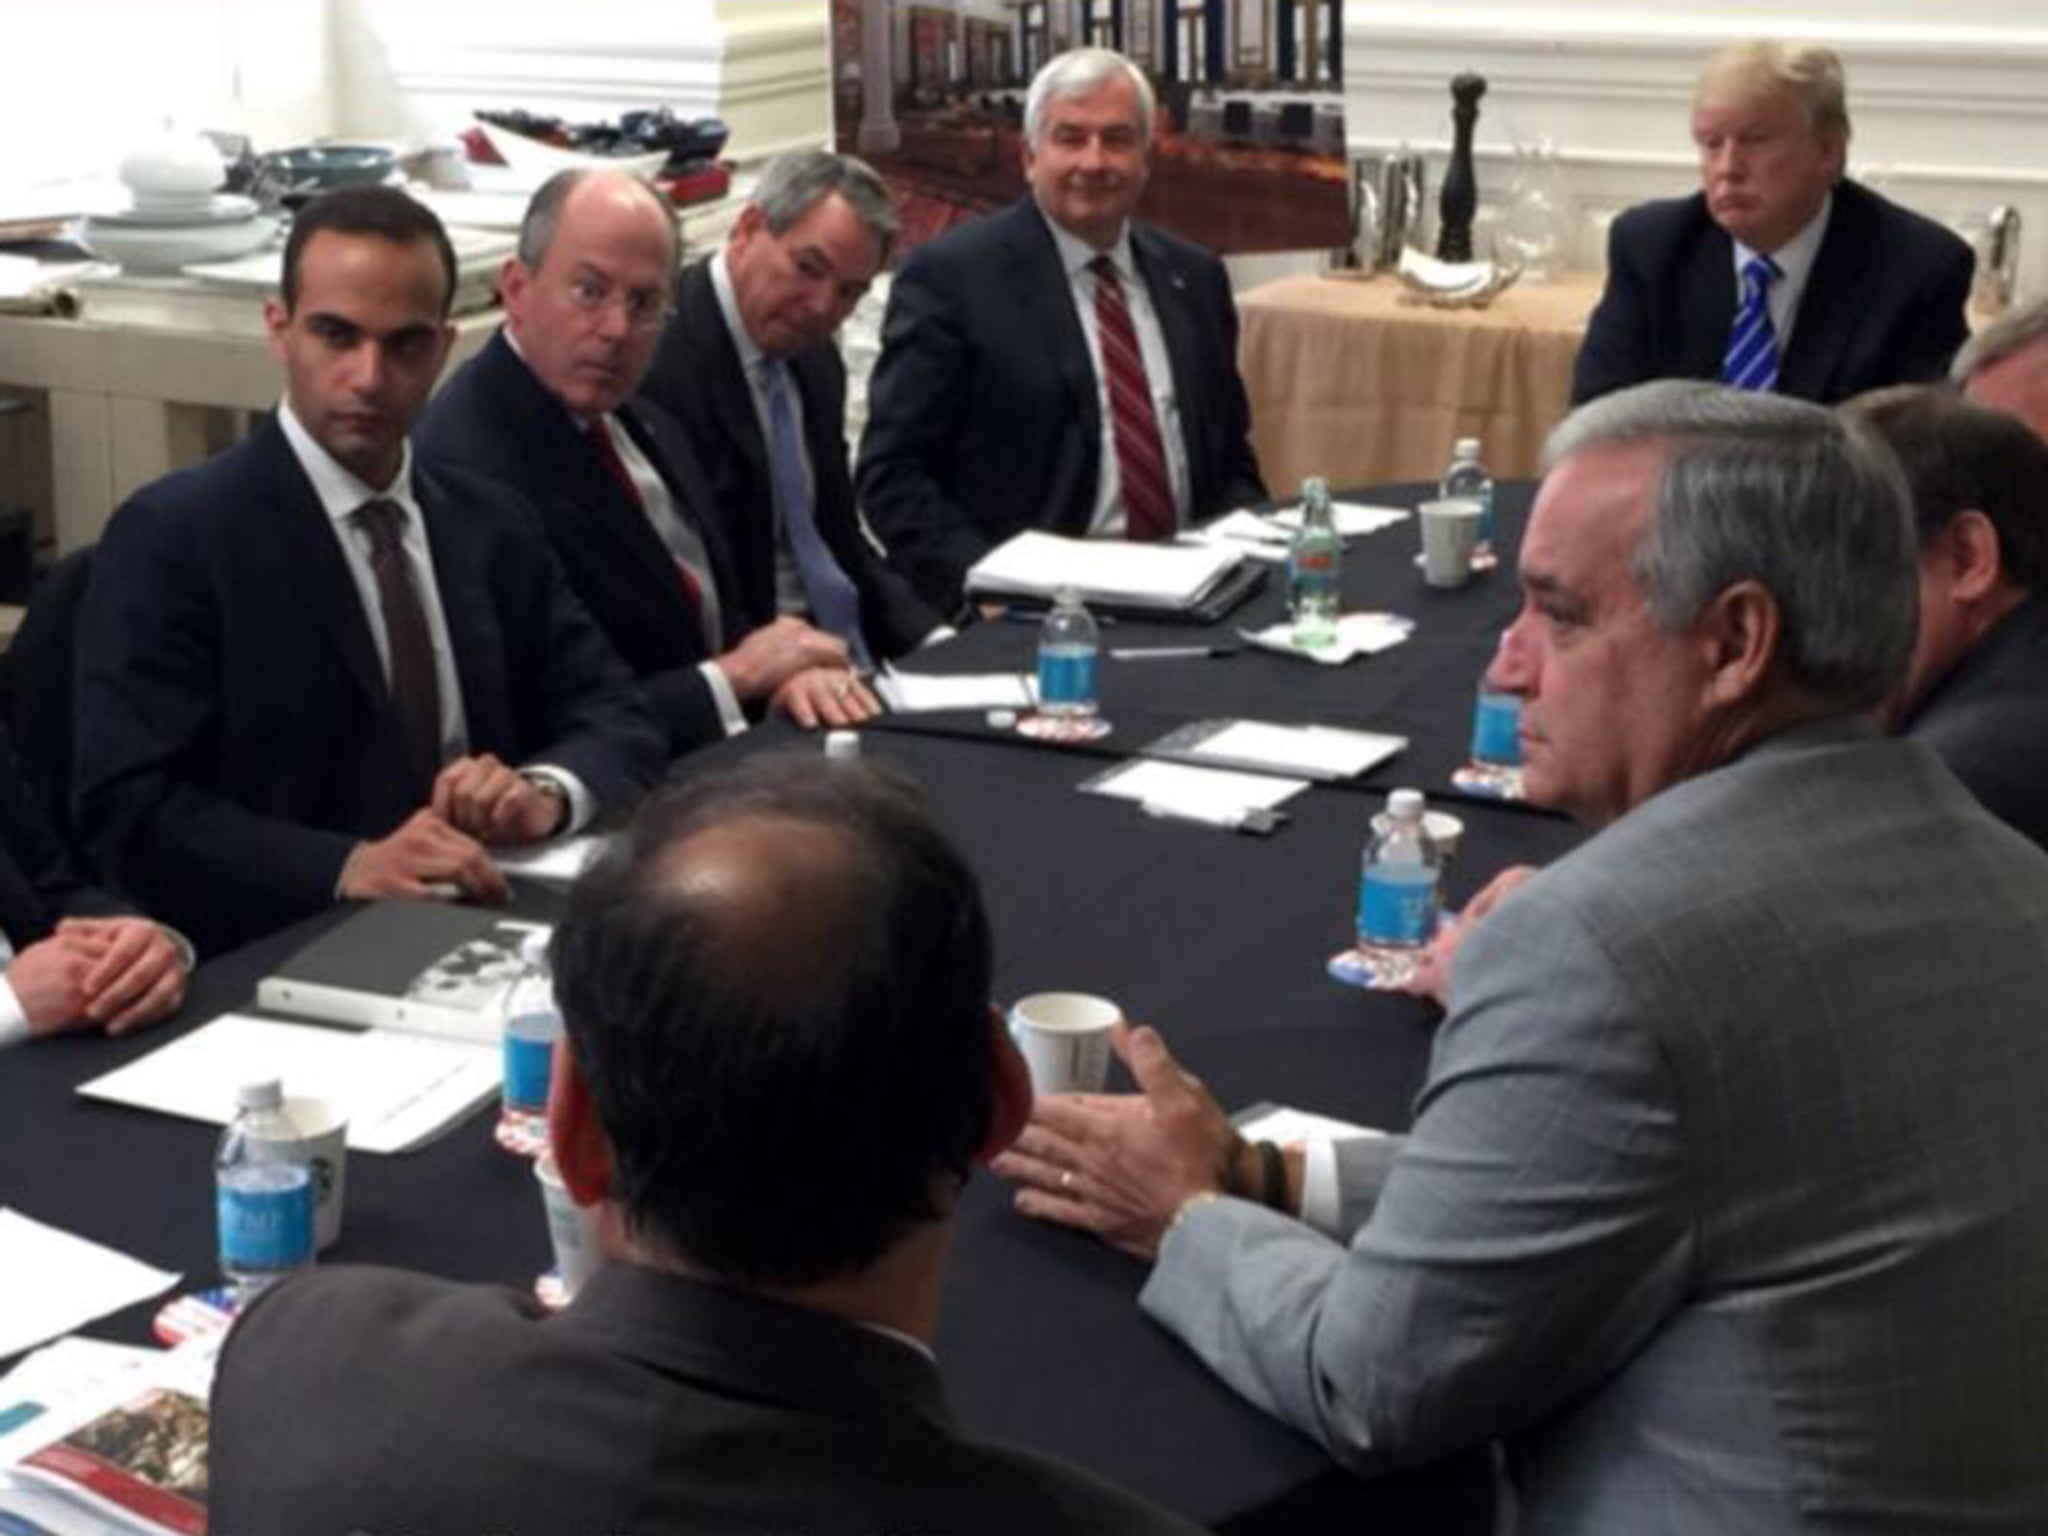 George Papadopoulos in a photograph released on Donald Trump's Instagram account